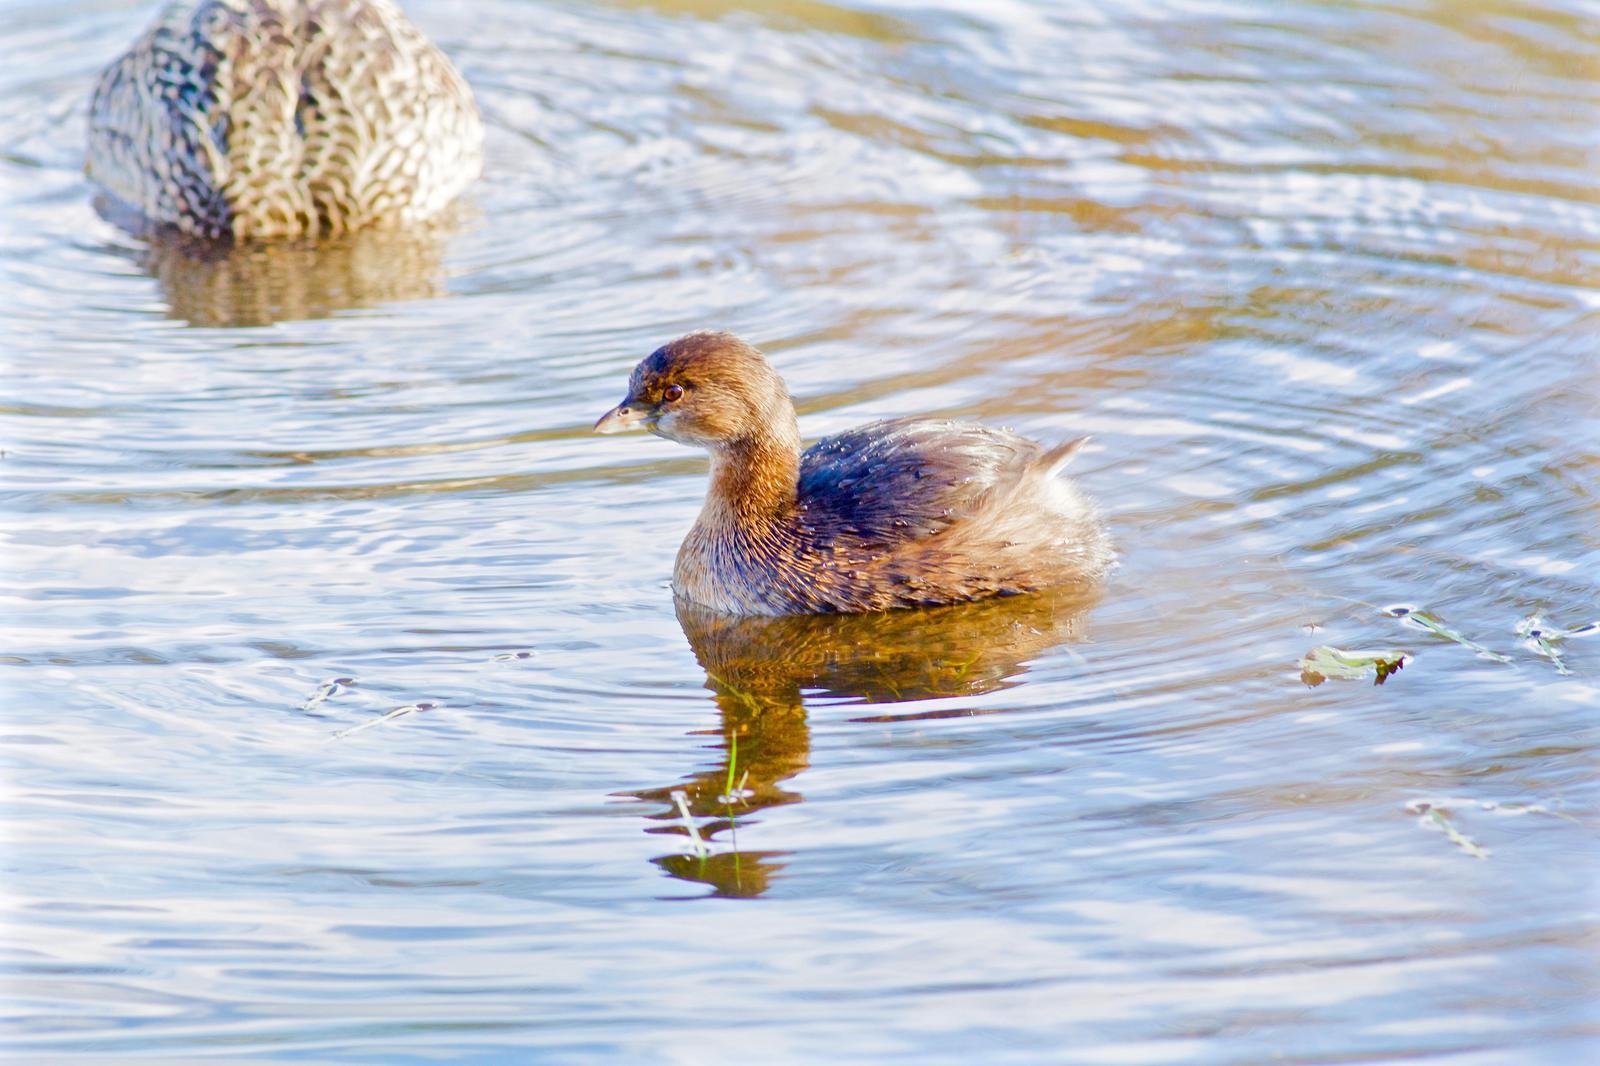 Pied-billed Grebe Photo by Kathryn Keith